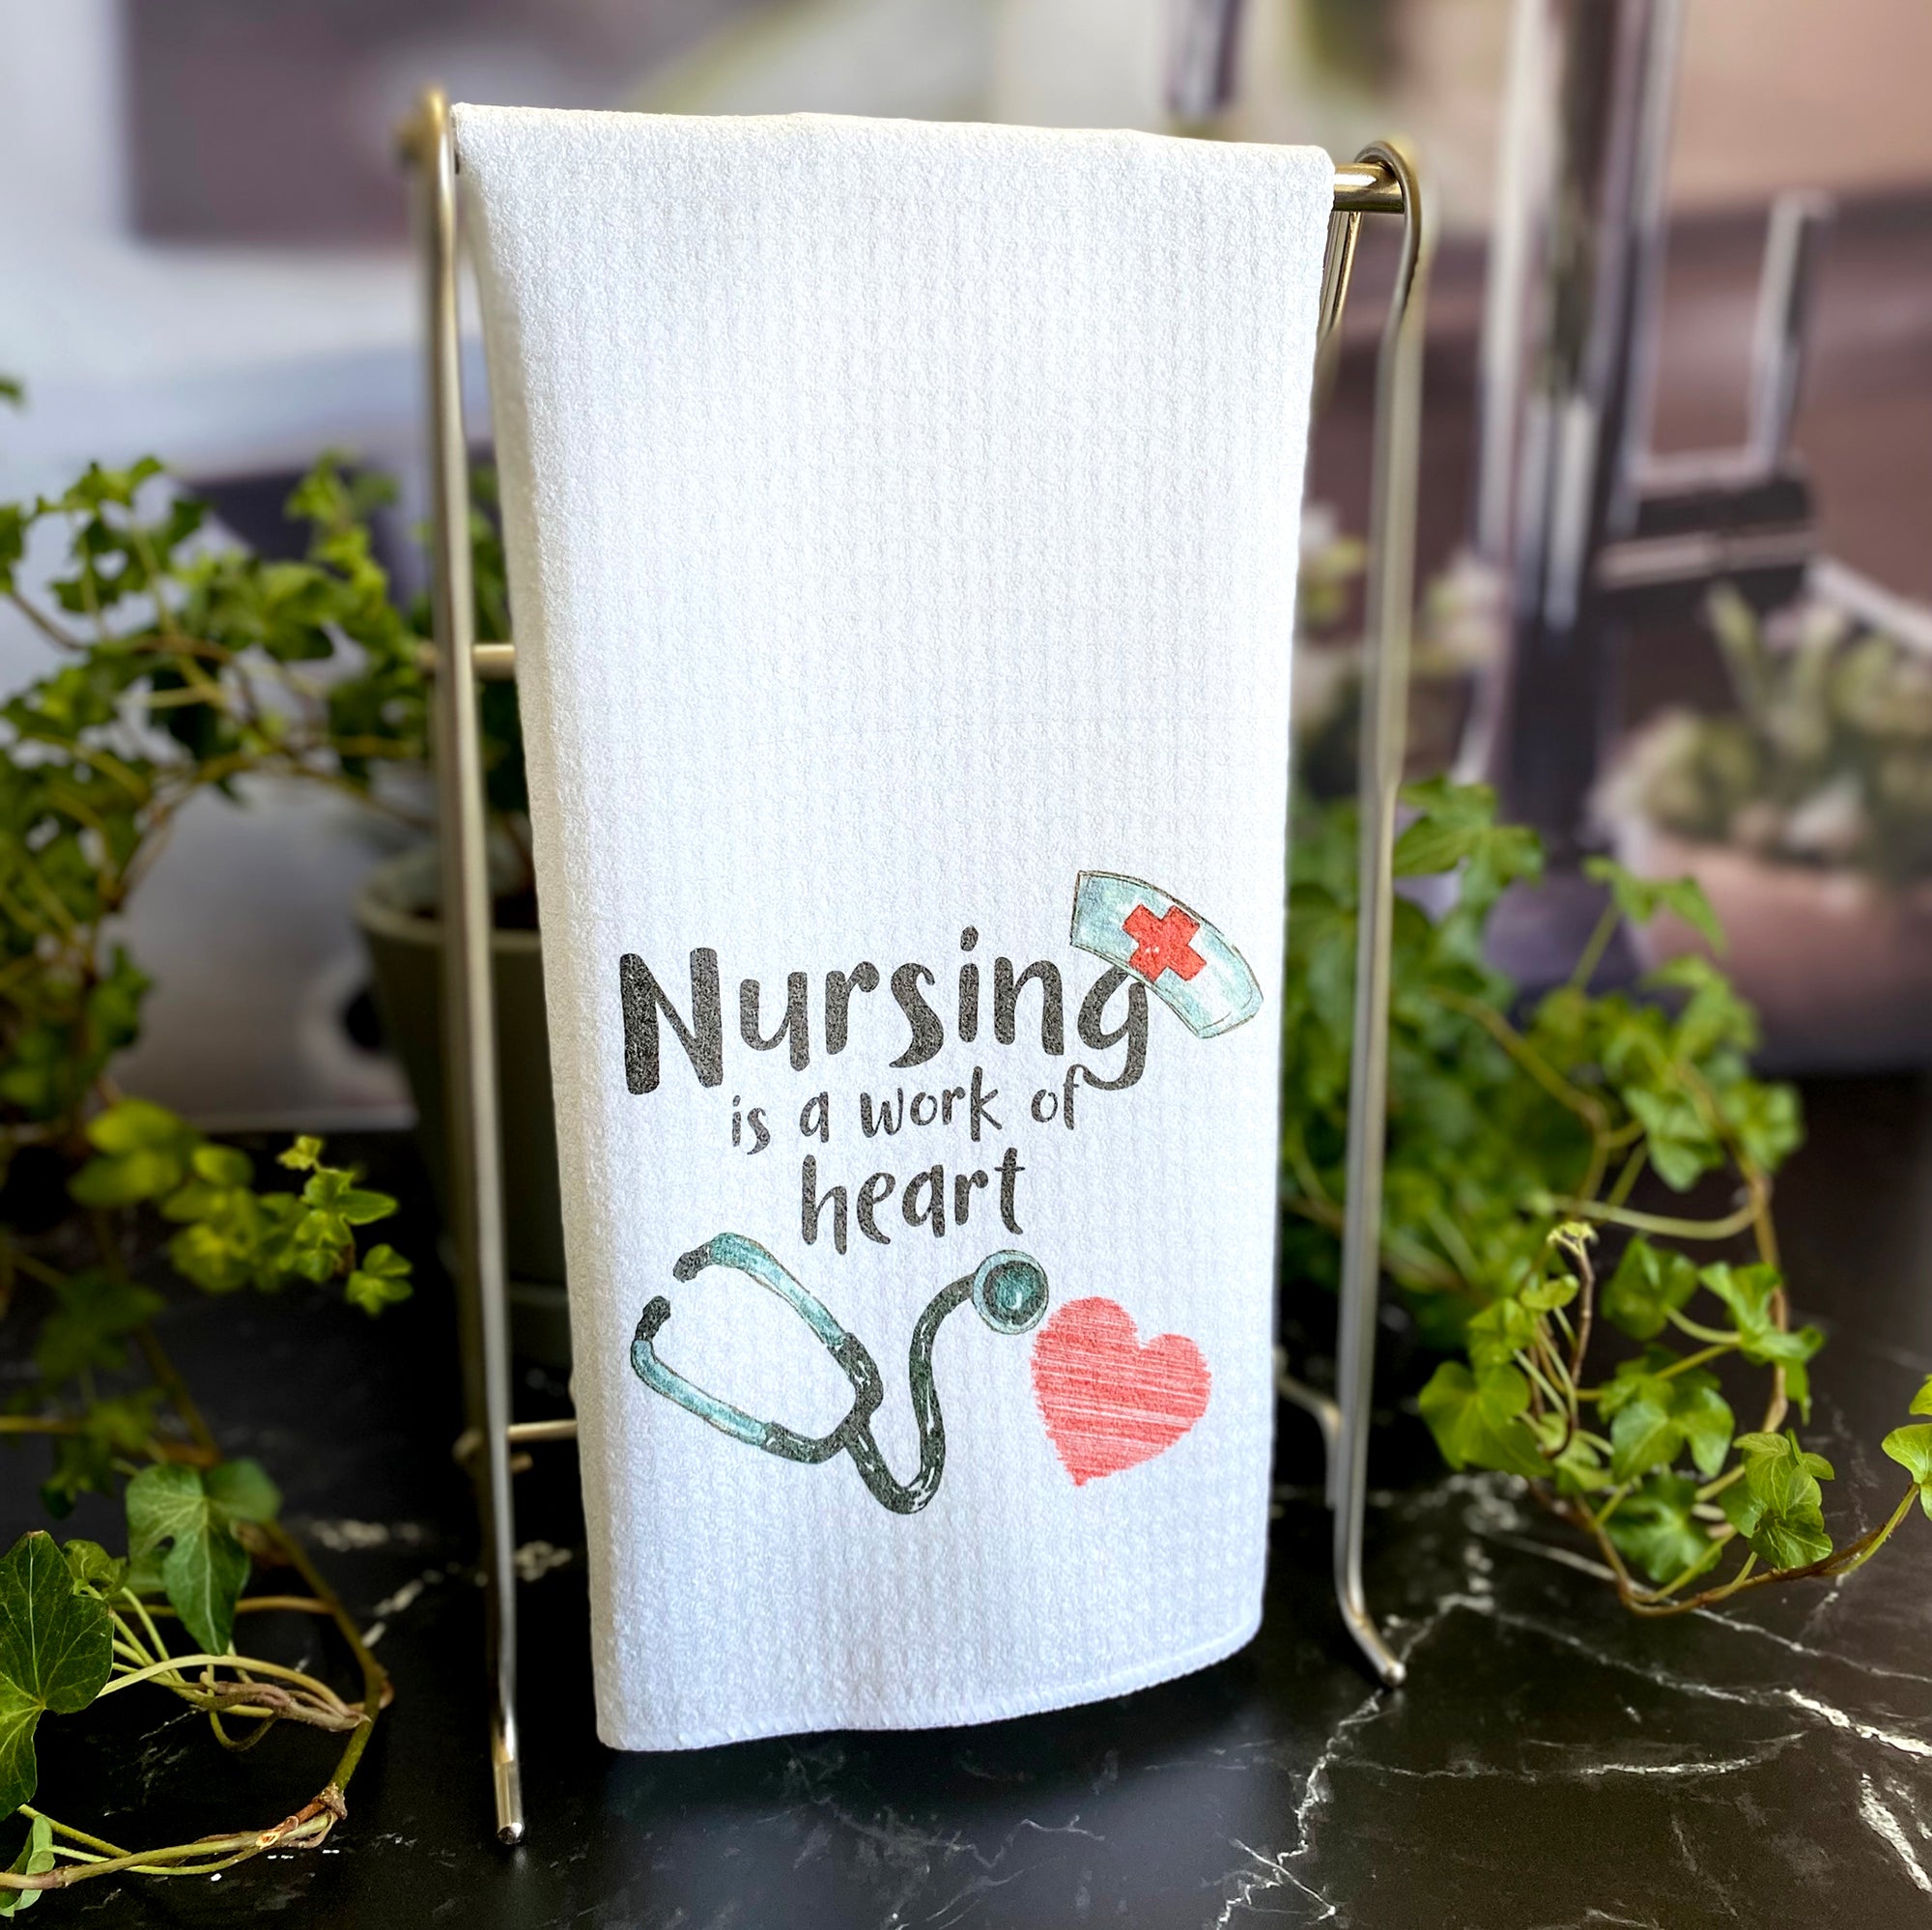 Dishtowel with "Nursing is a work of heart" with image of a hand drawn stethascope, heart and an old timey nurse's cap that appears to be hanging on the letter G.  